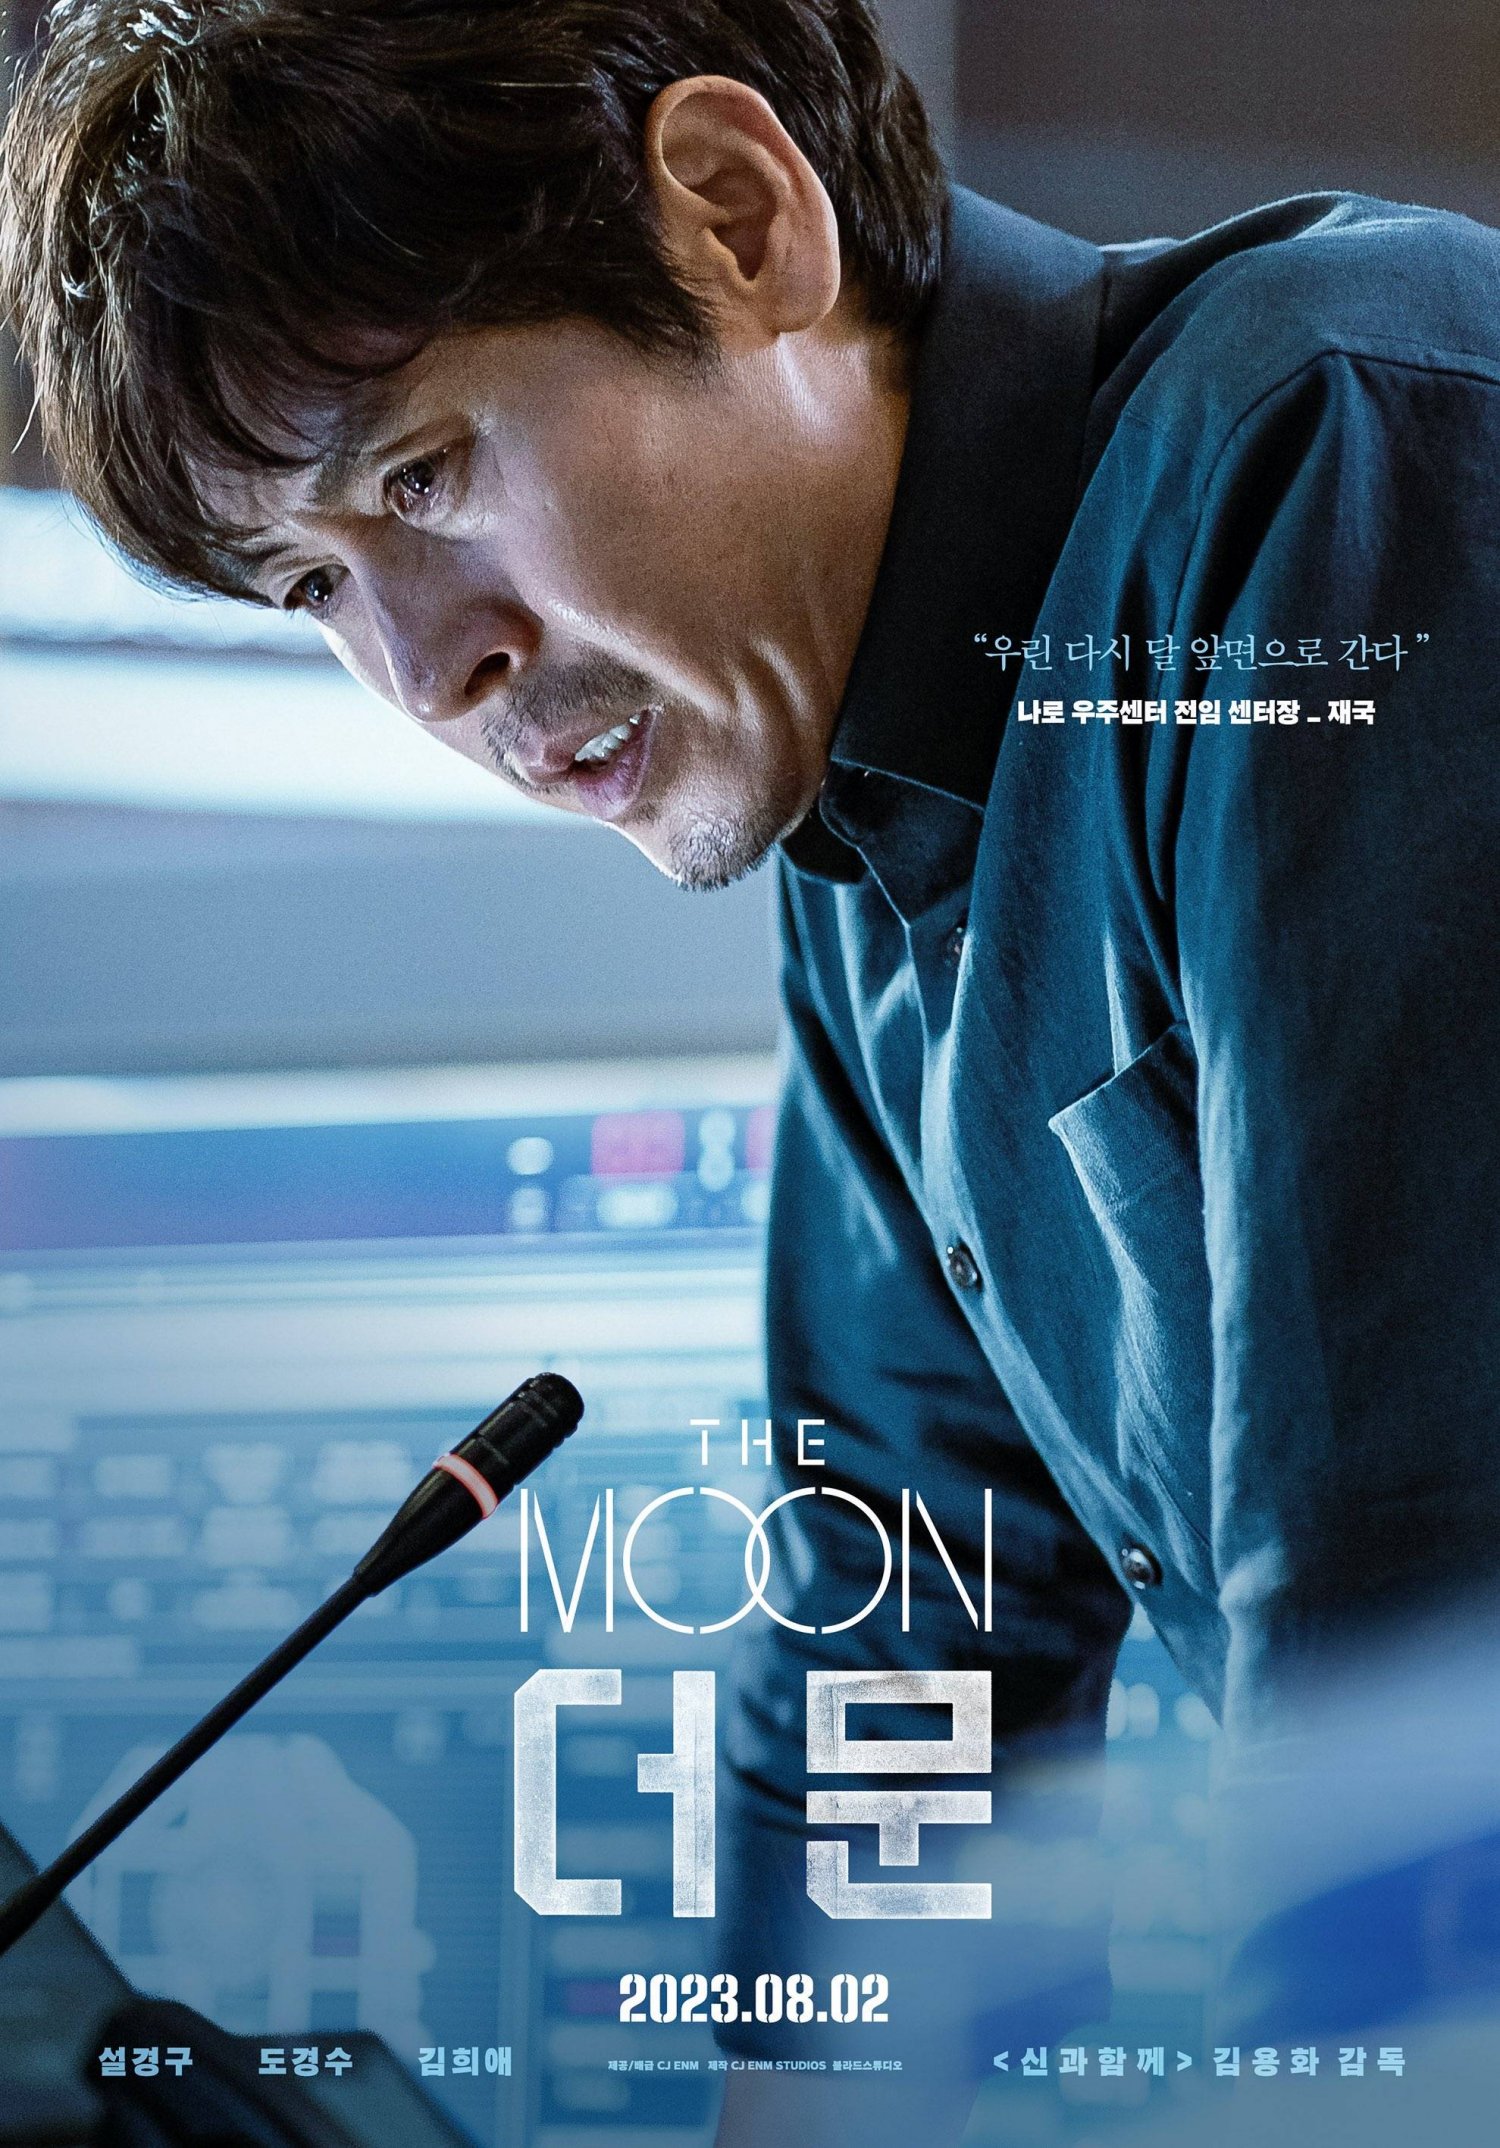 the moon movie review reddit